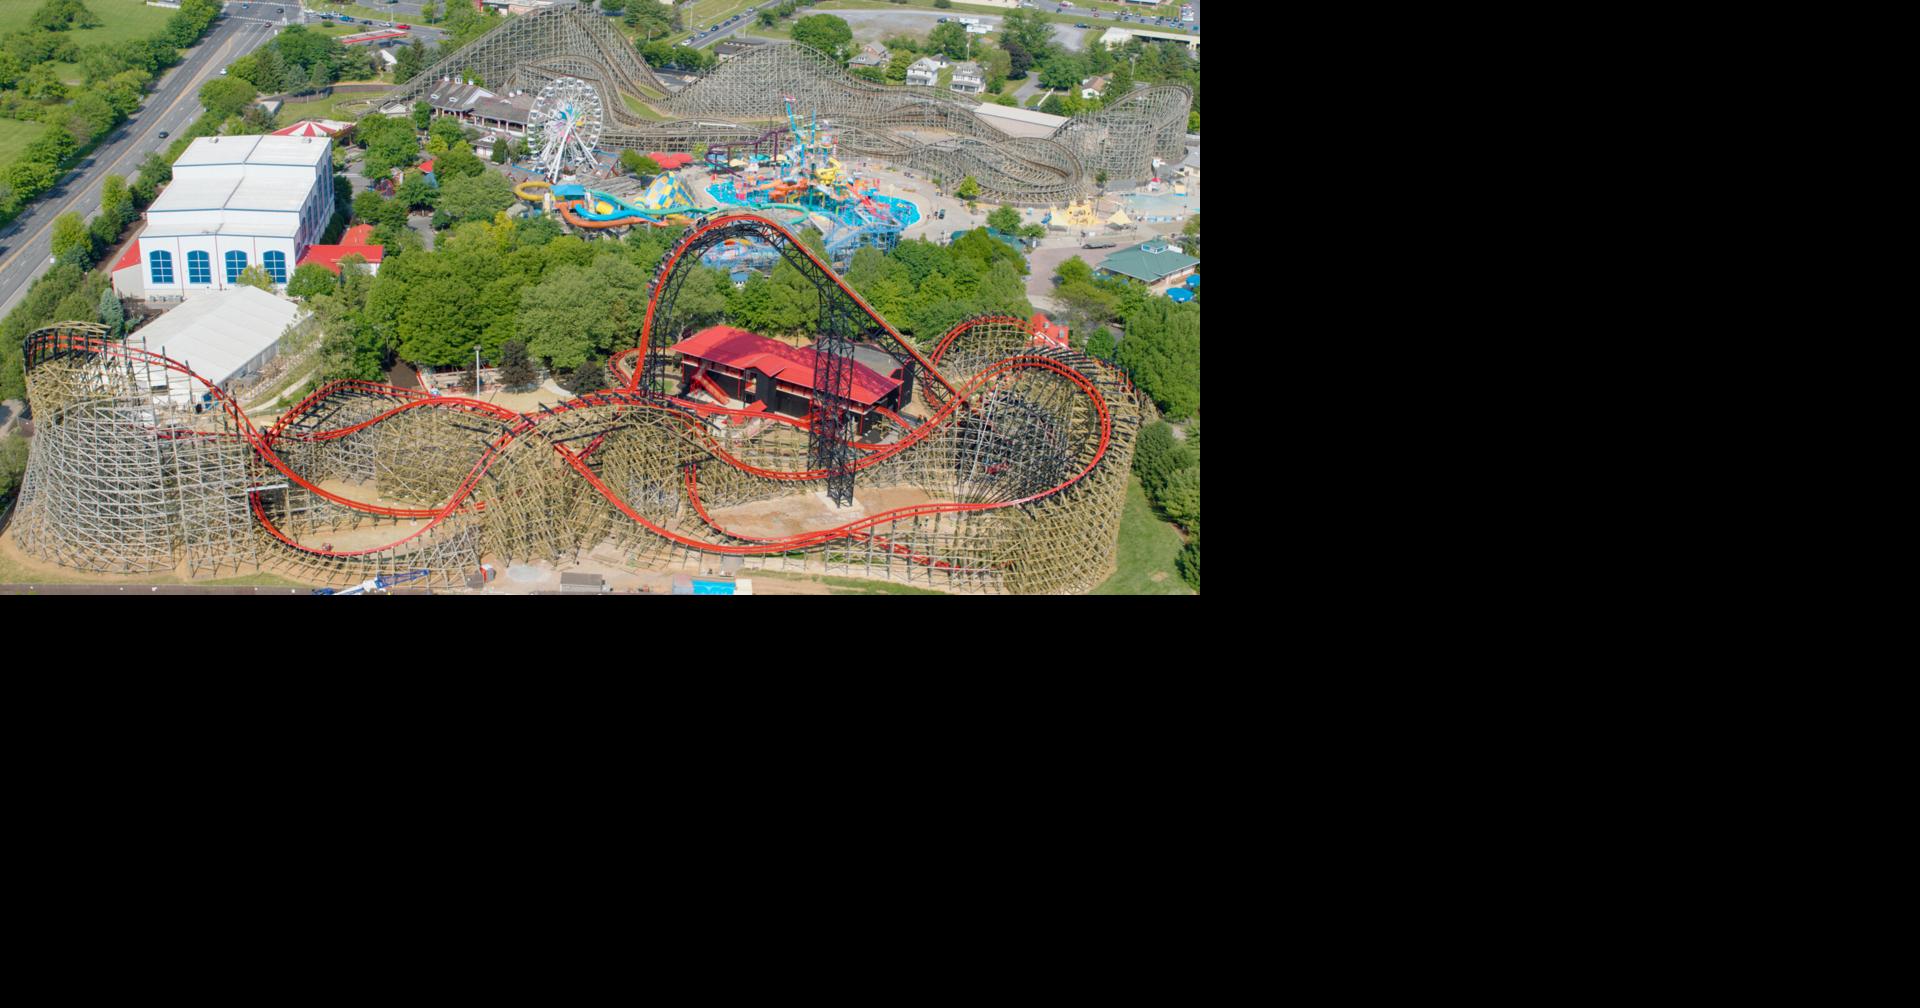 New hybrid roller coaster to debut with 'world's largest underflip